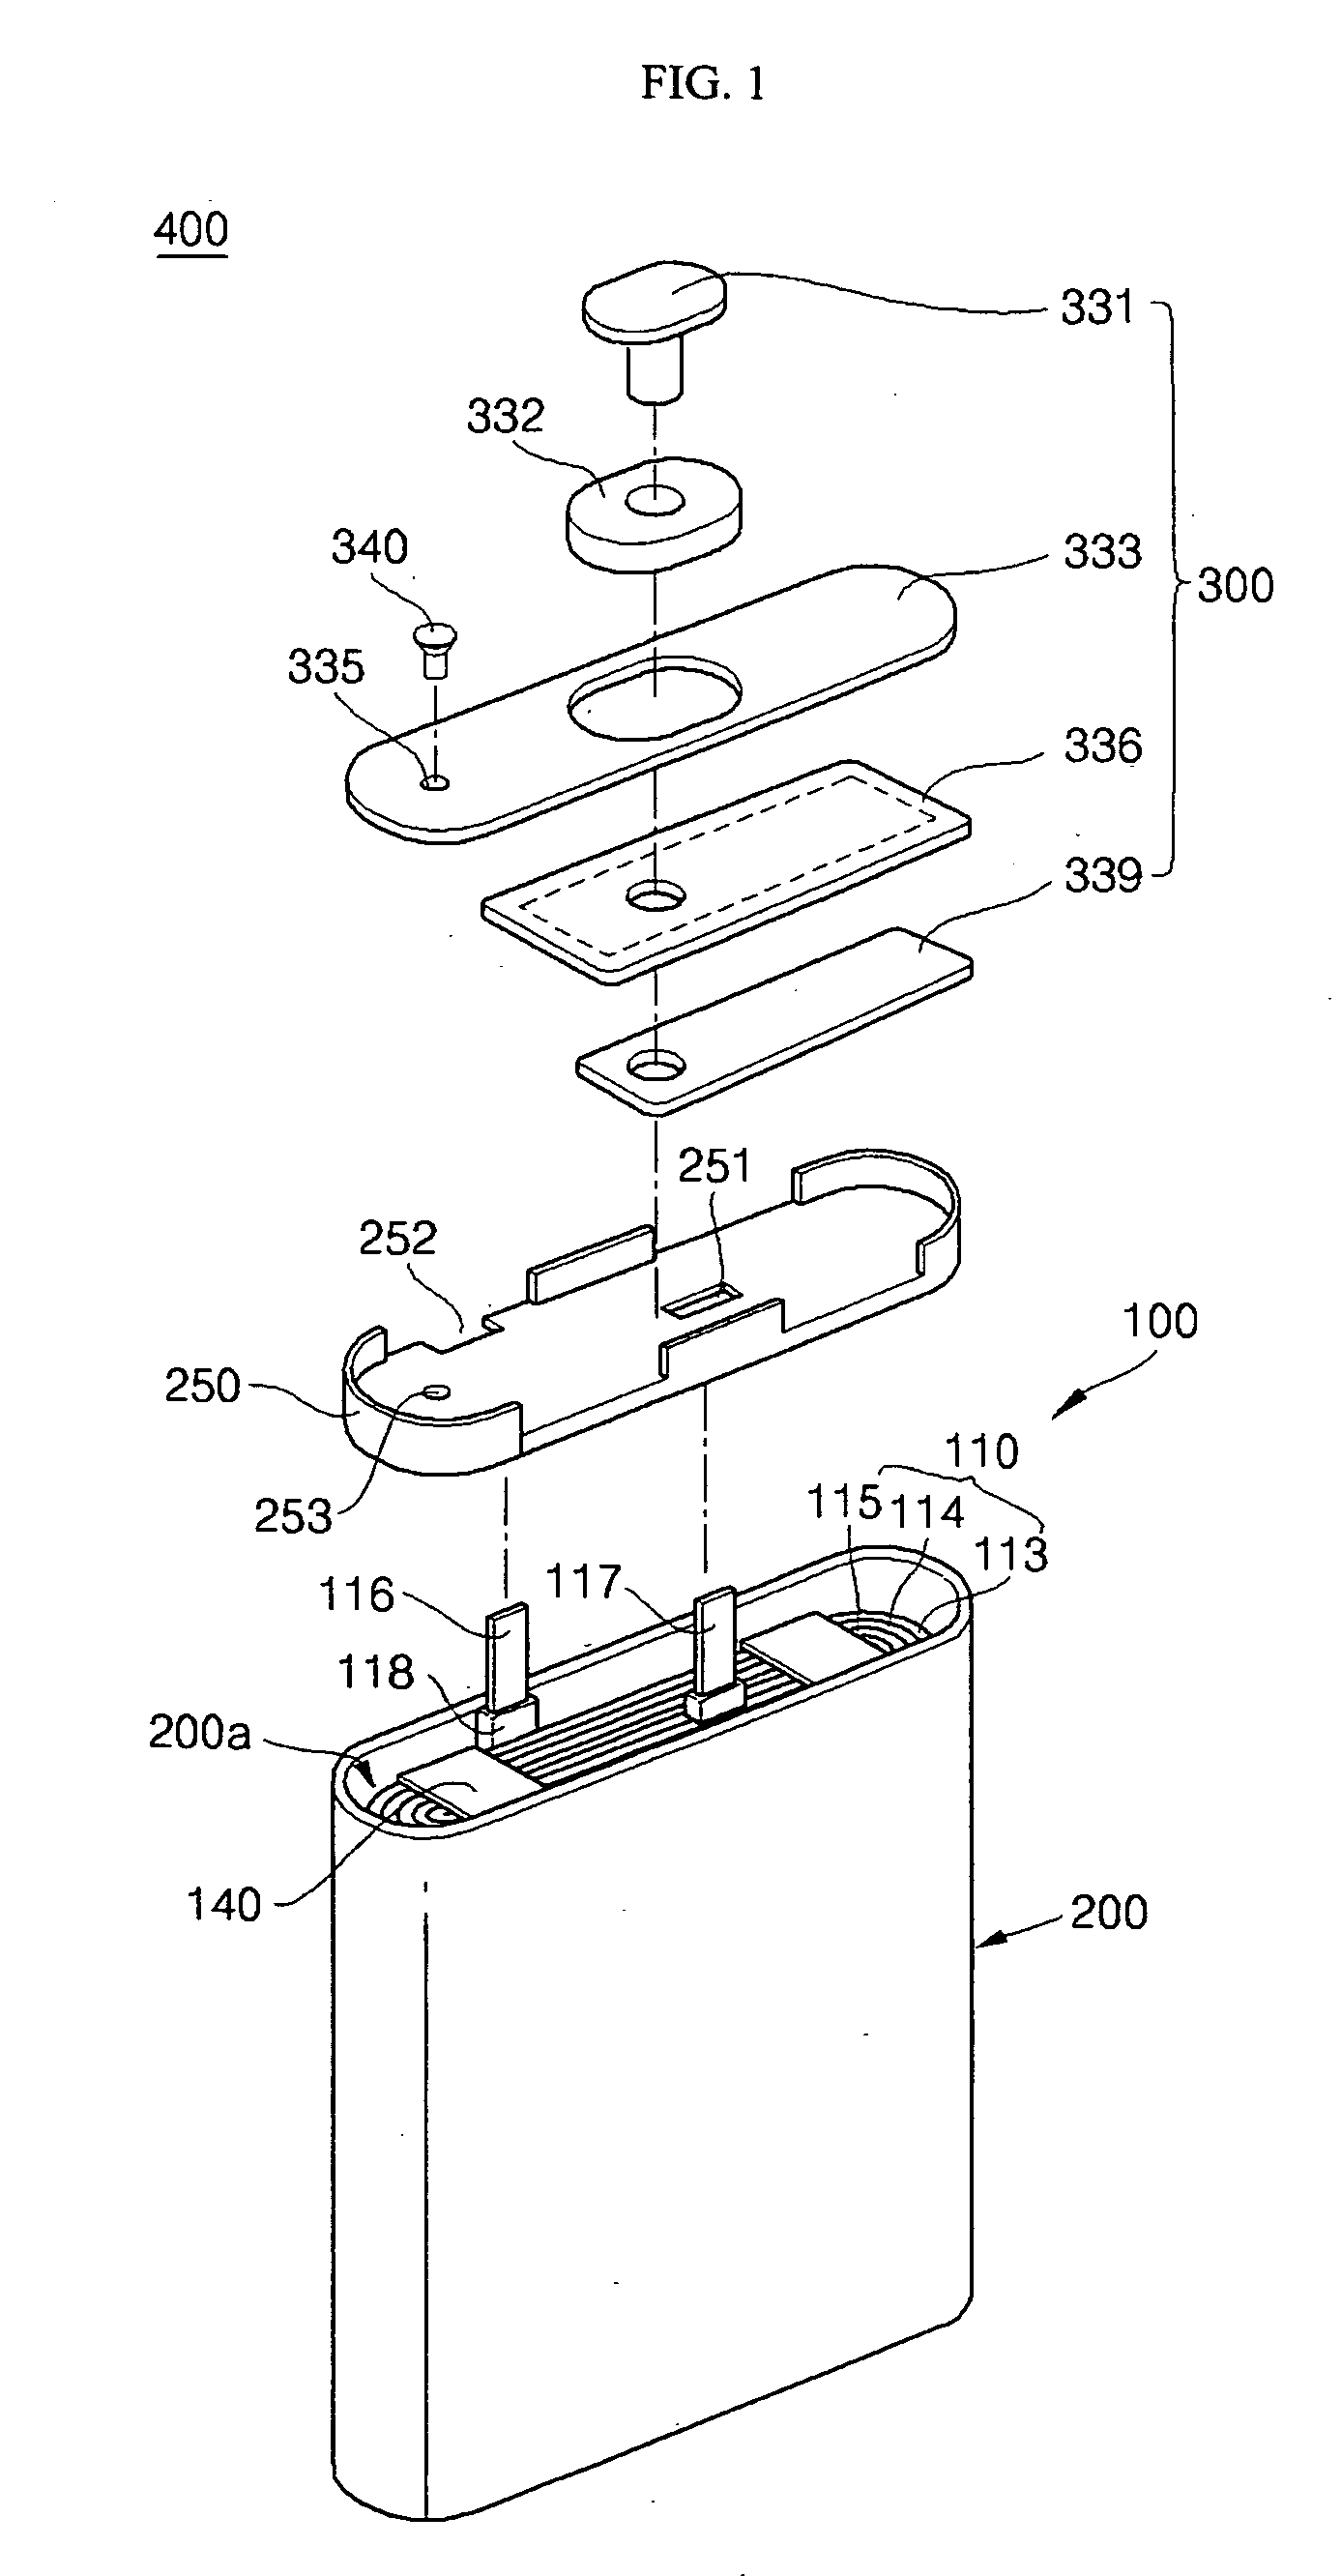 Rechargeable battery and its fabrication method